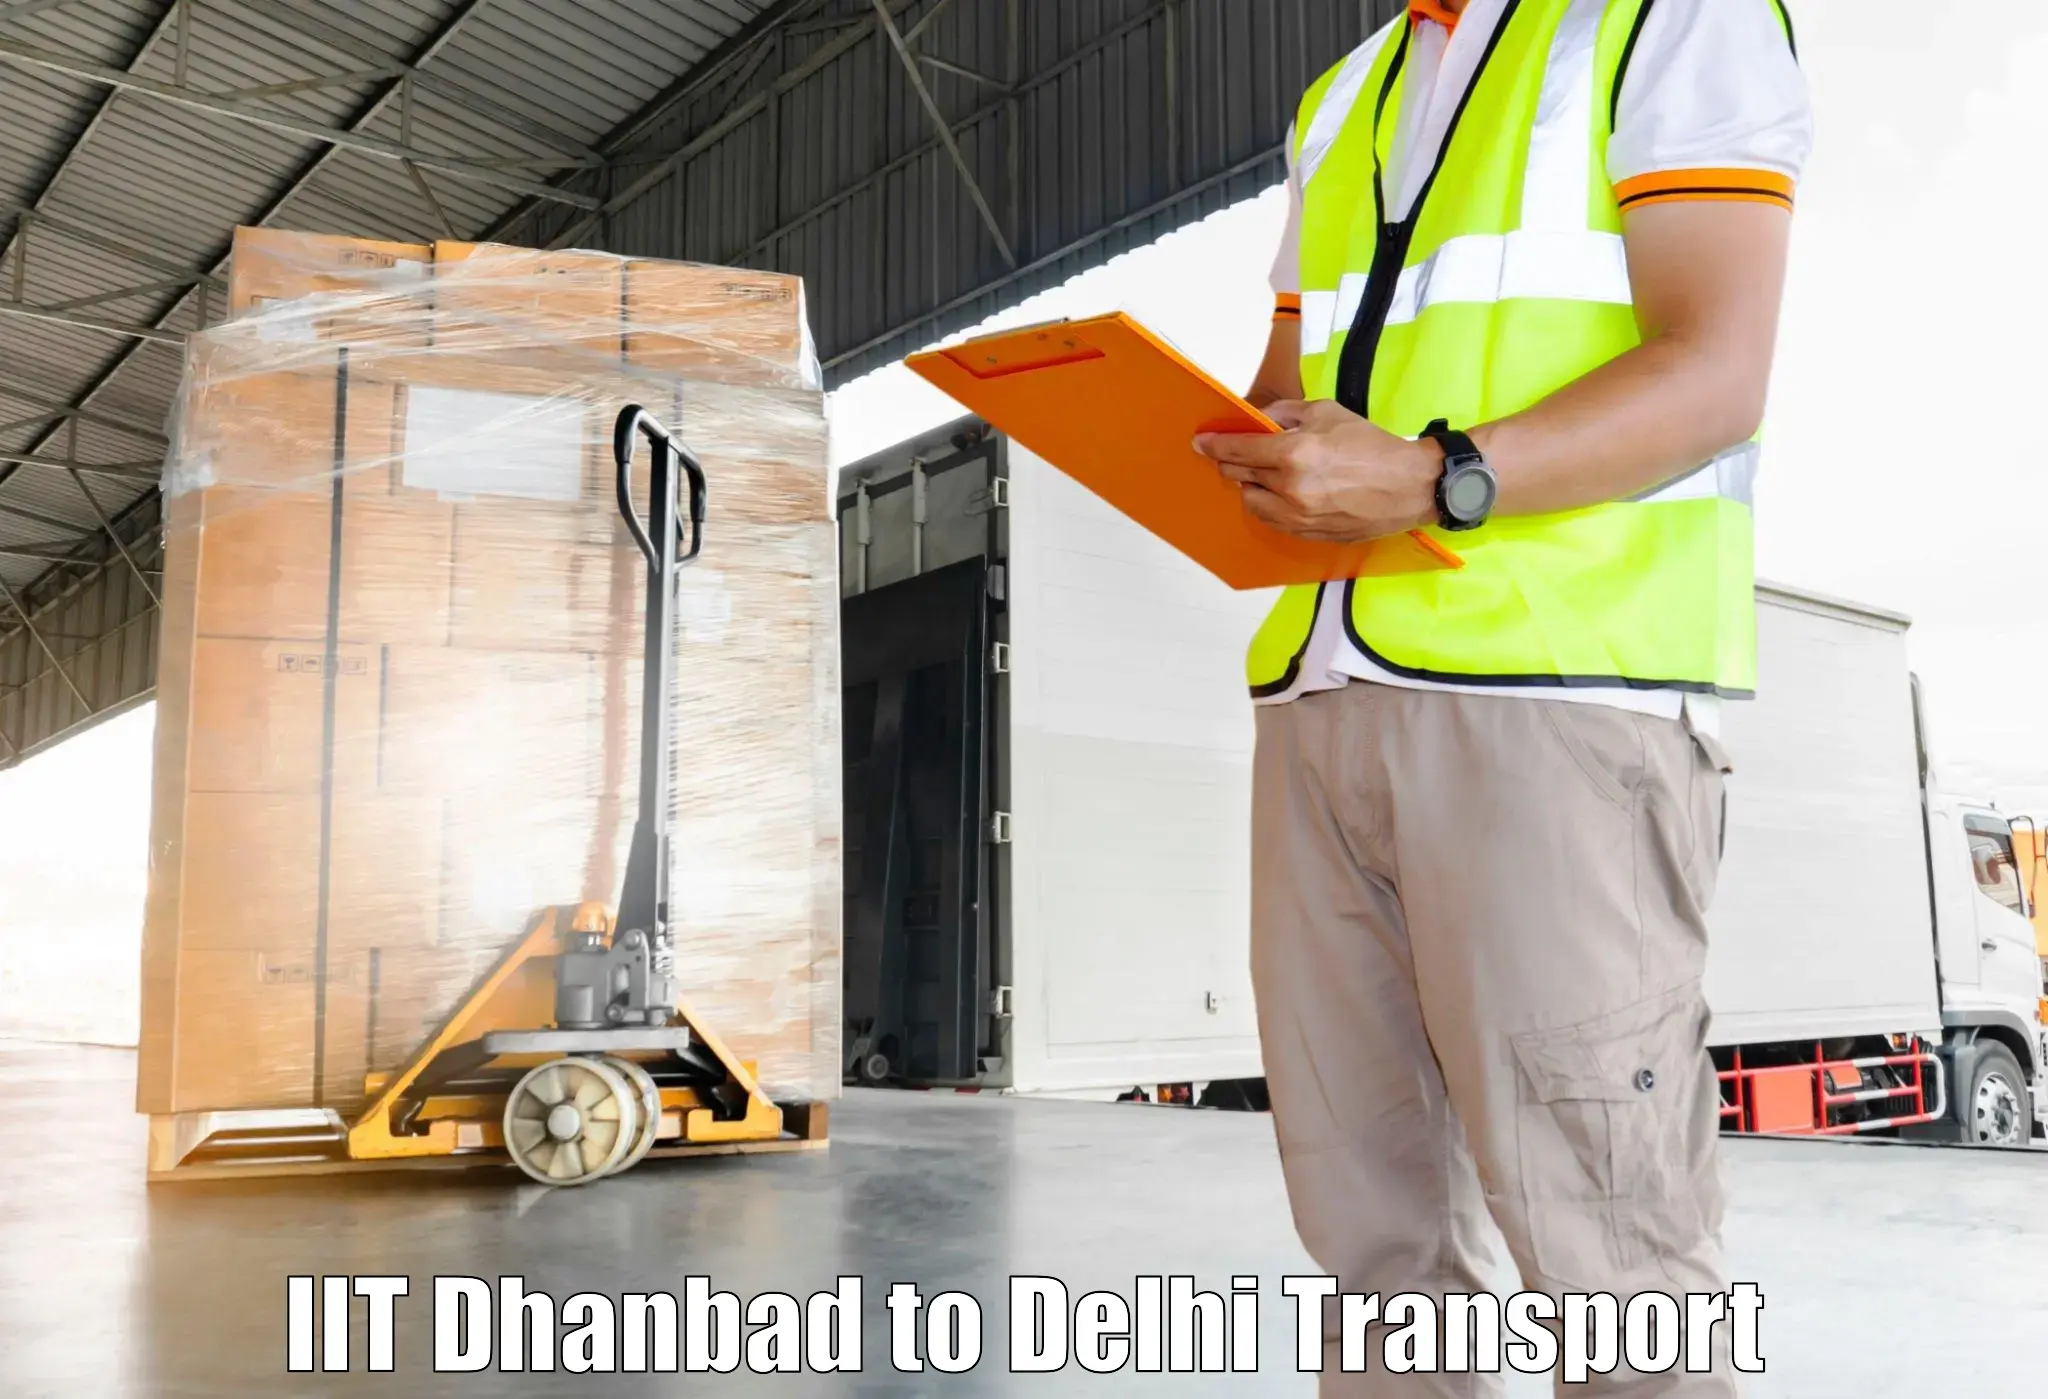 Container transport service IIT Dhanbad to NCR